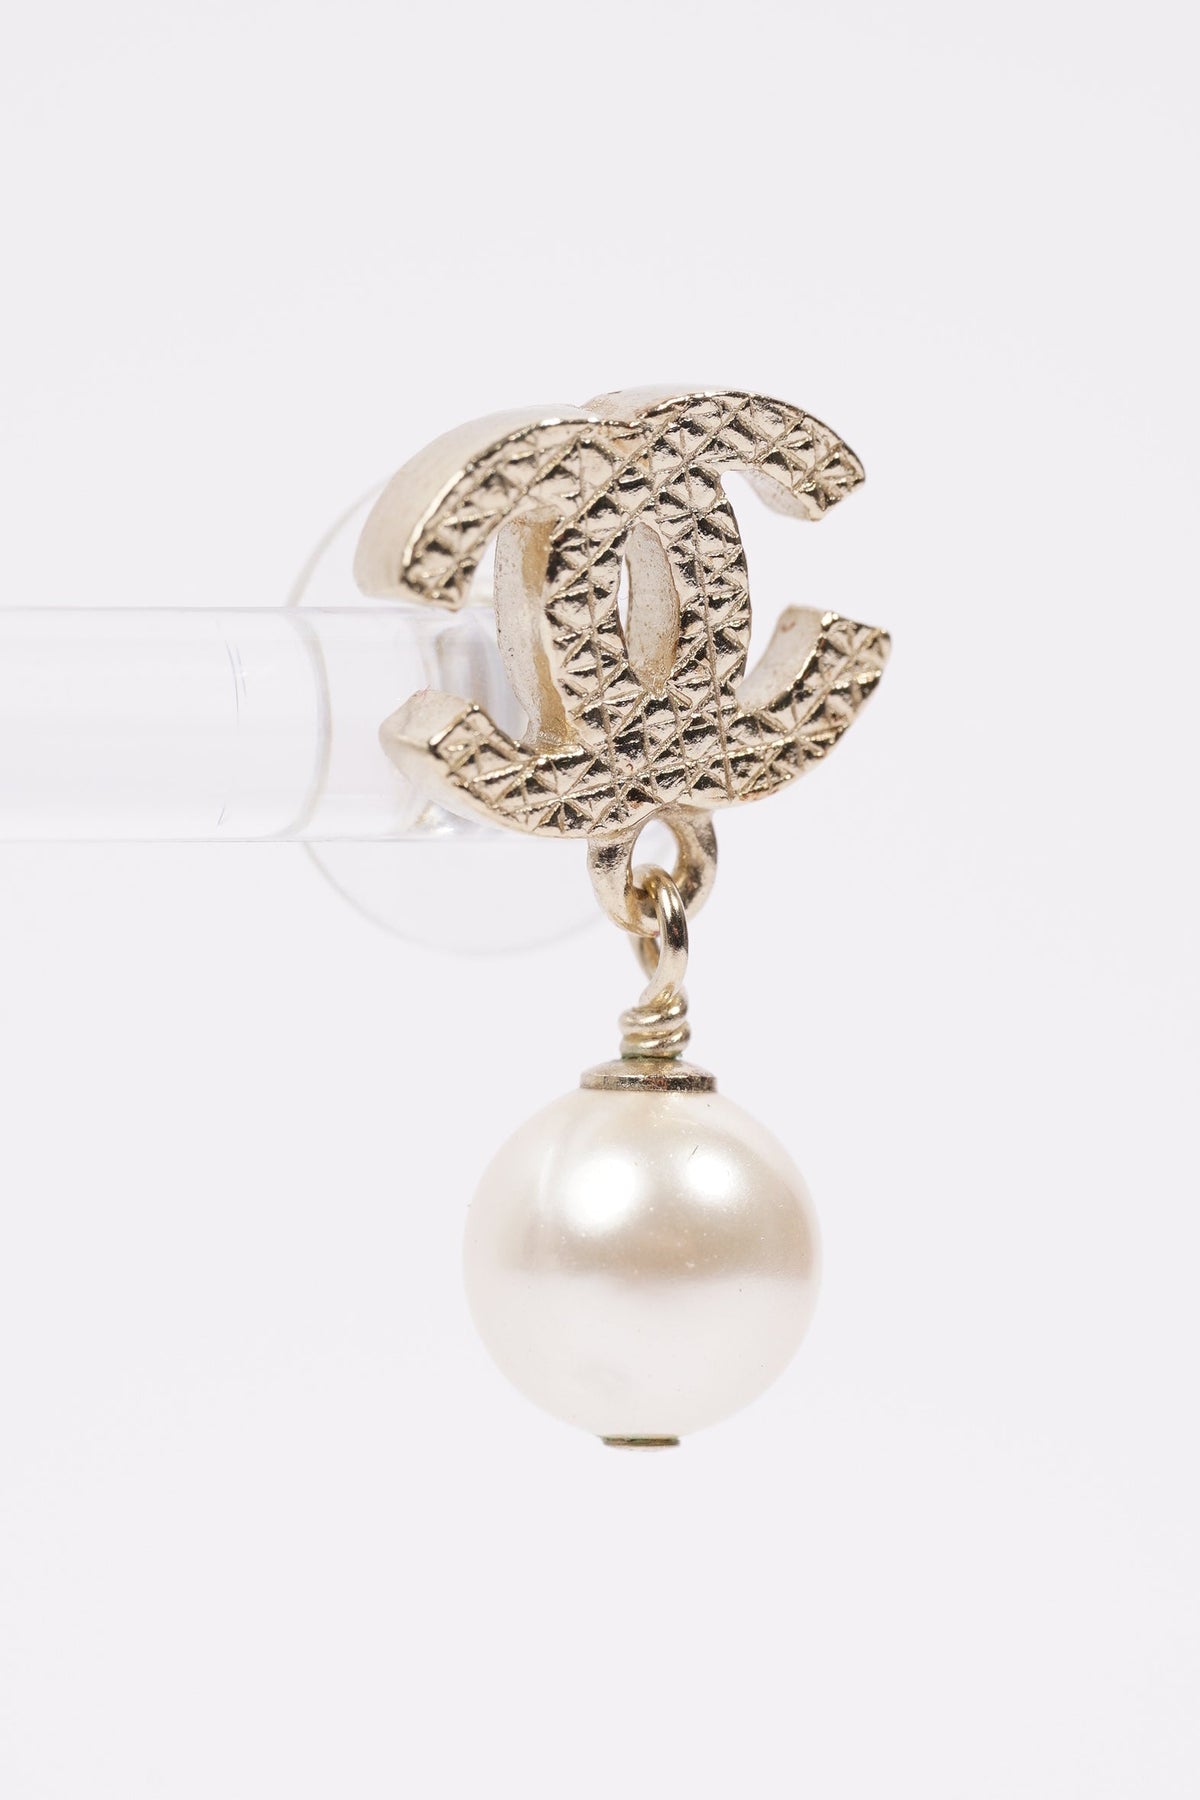 Chanel Gold Tone Crystal CC Pearl Drop Earrings Chanel | The Luxury Closet